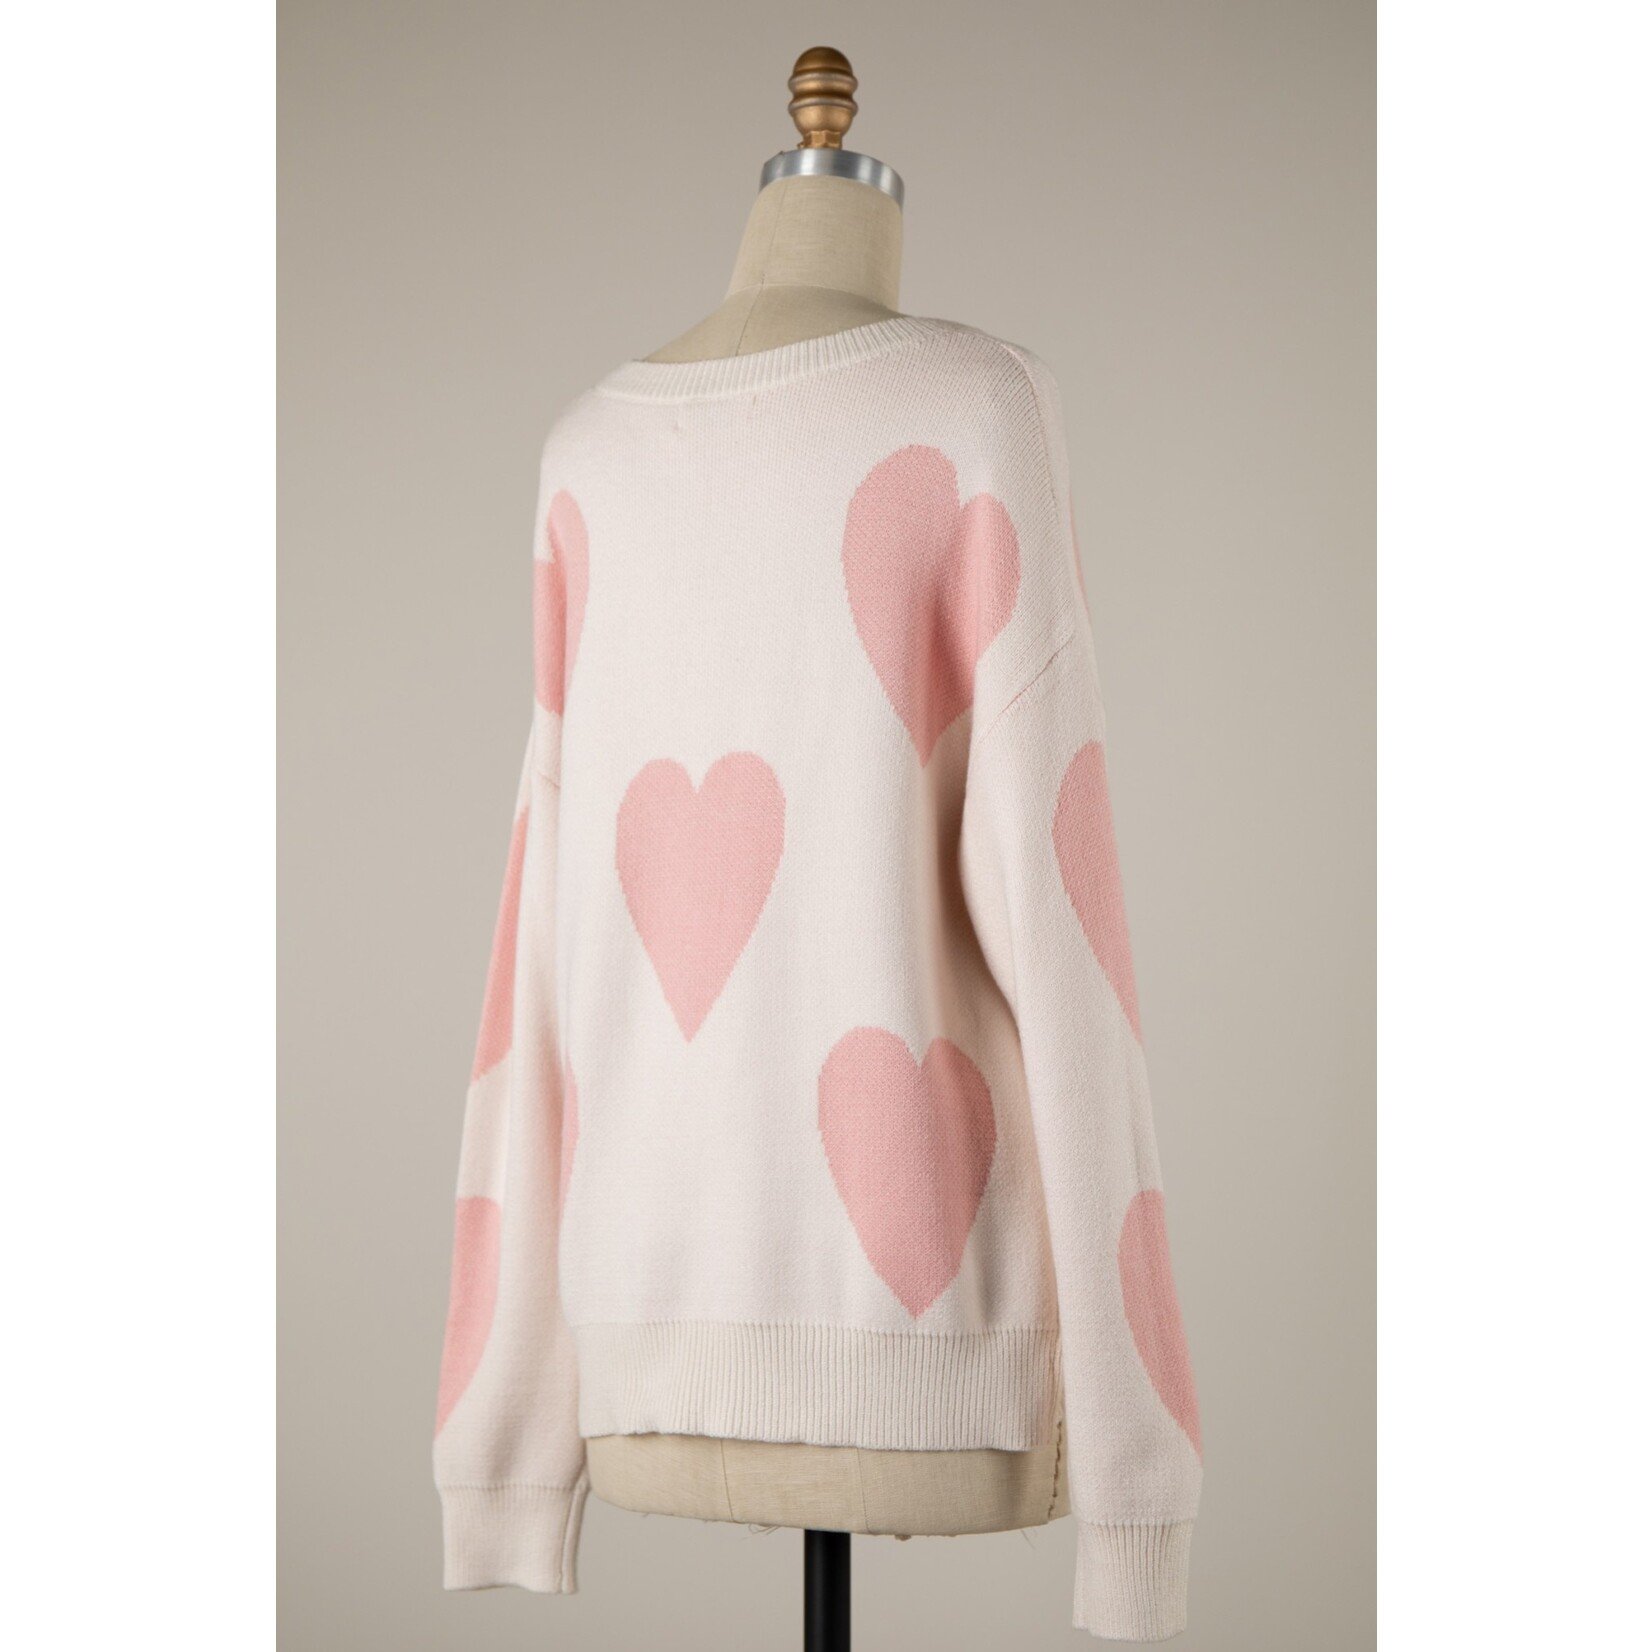 Miracle Heart Valentine Sweater